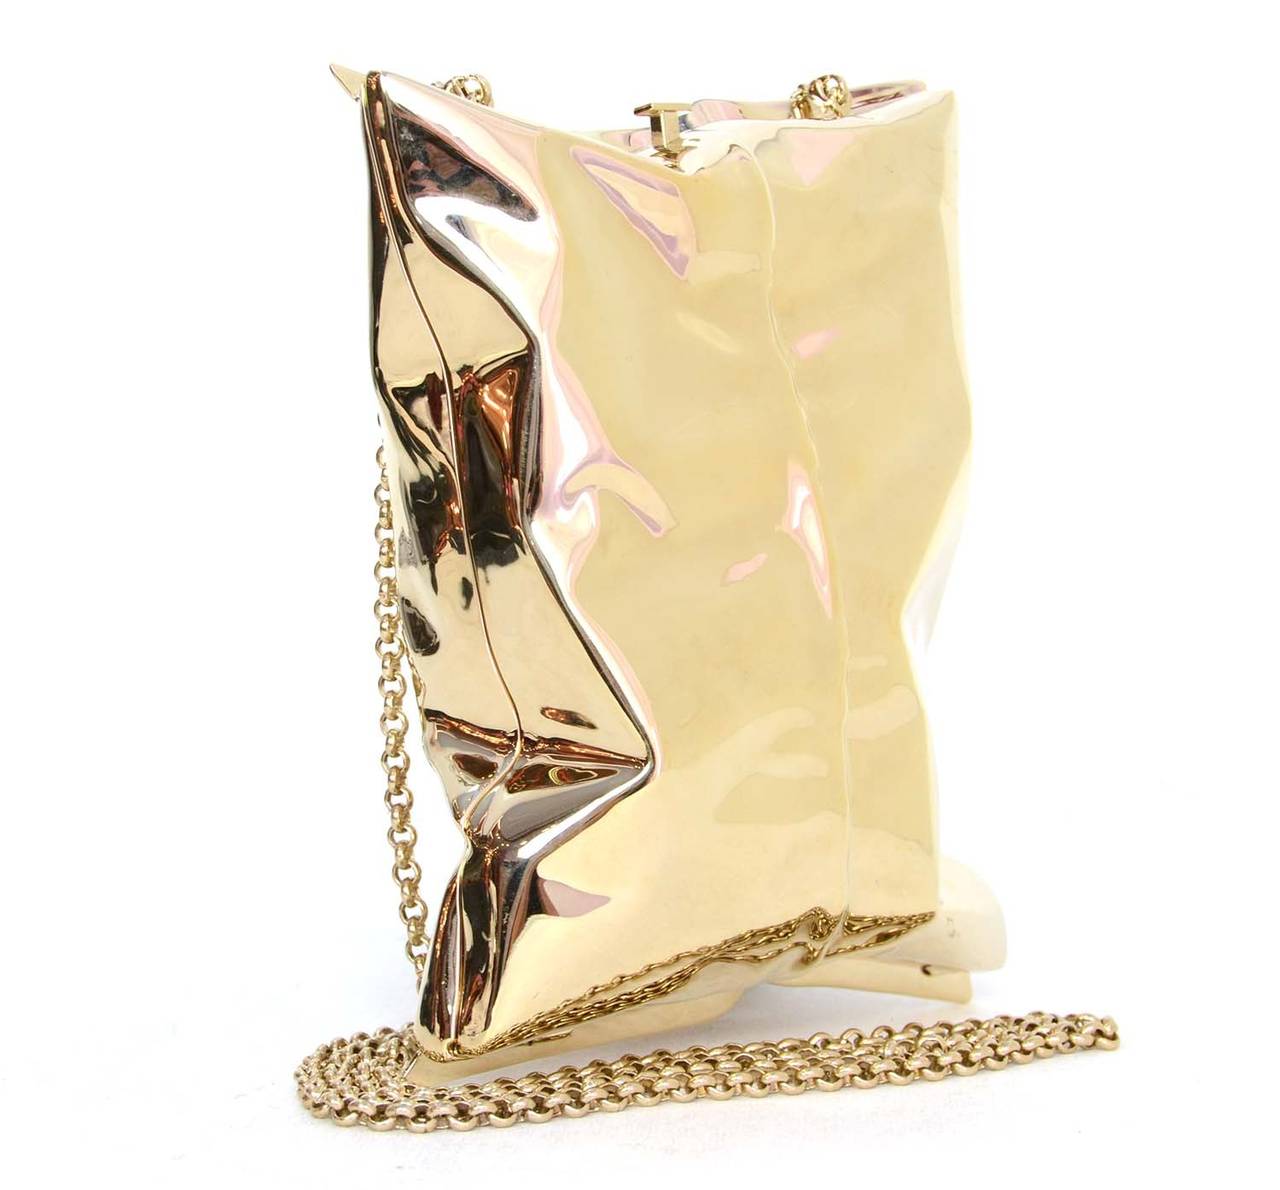 Anya Hindmarch Gold Crisp Packet Clutch Bag
Features detachable shoulder strap

    Made in: Italy
    Color: Pale gold
    Hardware: Pale gold
    Materials: Metal
    Lining: Beige suede
    Closure/opening: Button push hinge opening
   